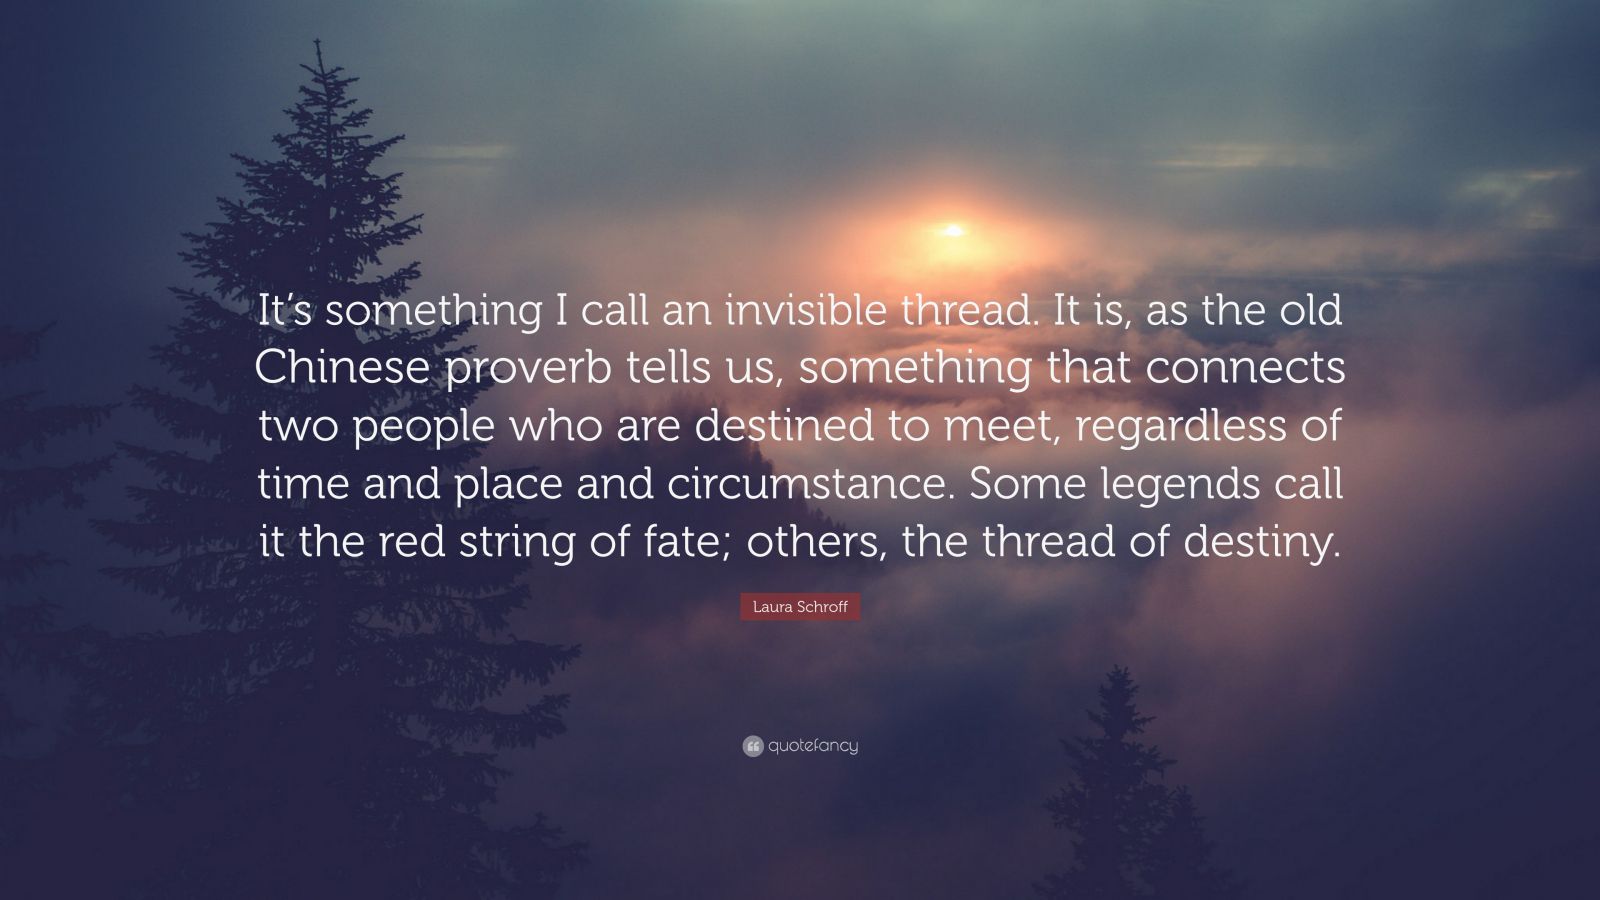 https://quotefancy.com/media/wallpaper/1600x900/6532204-Laura-Schroff-Quote-It-s-something-I-call-an-invisible-thread-It.jpg